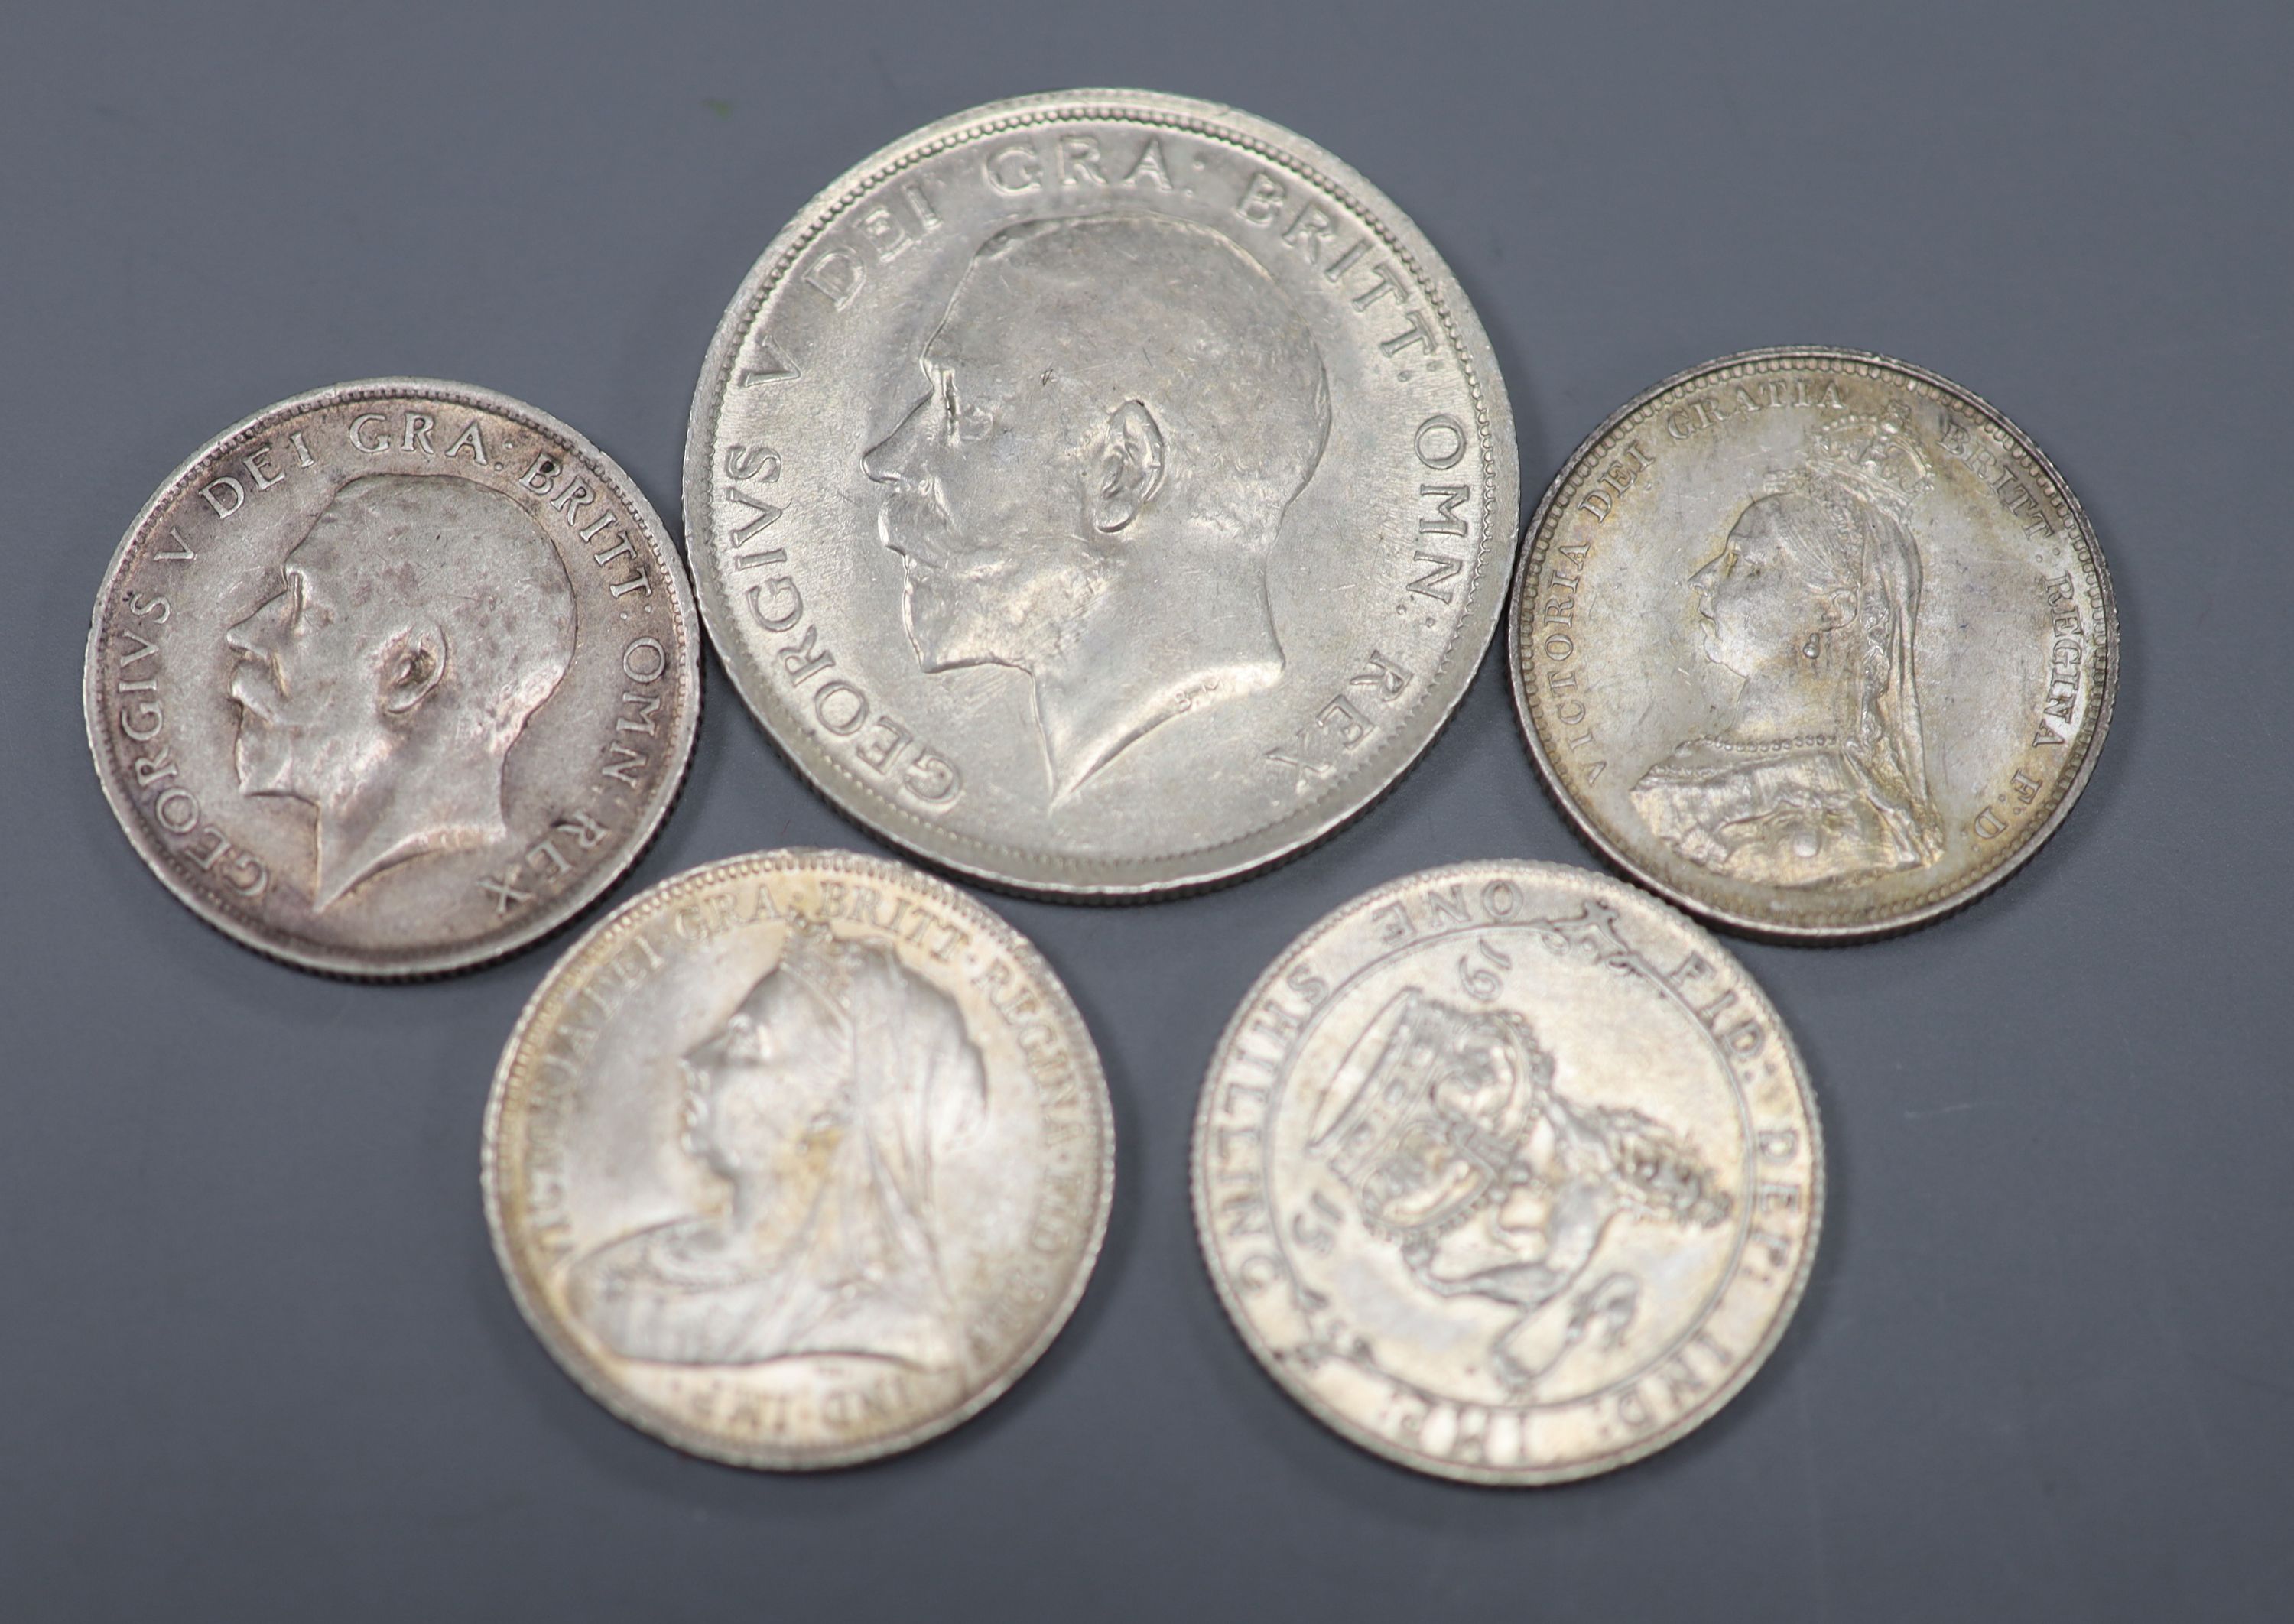 Victoria to George V silver coins,